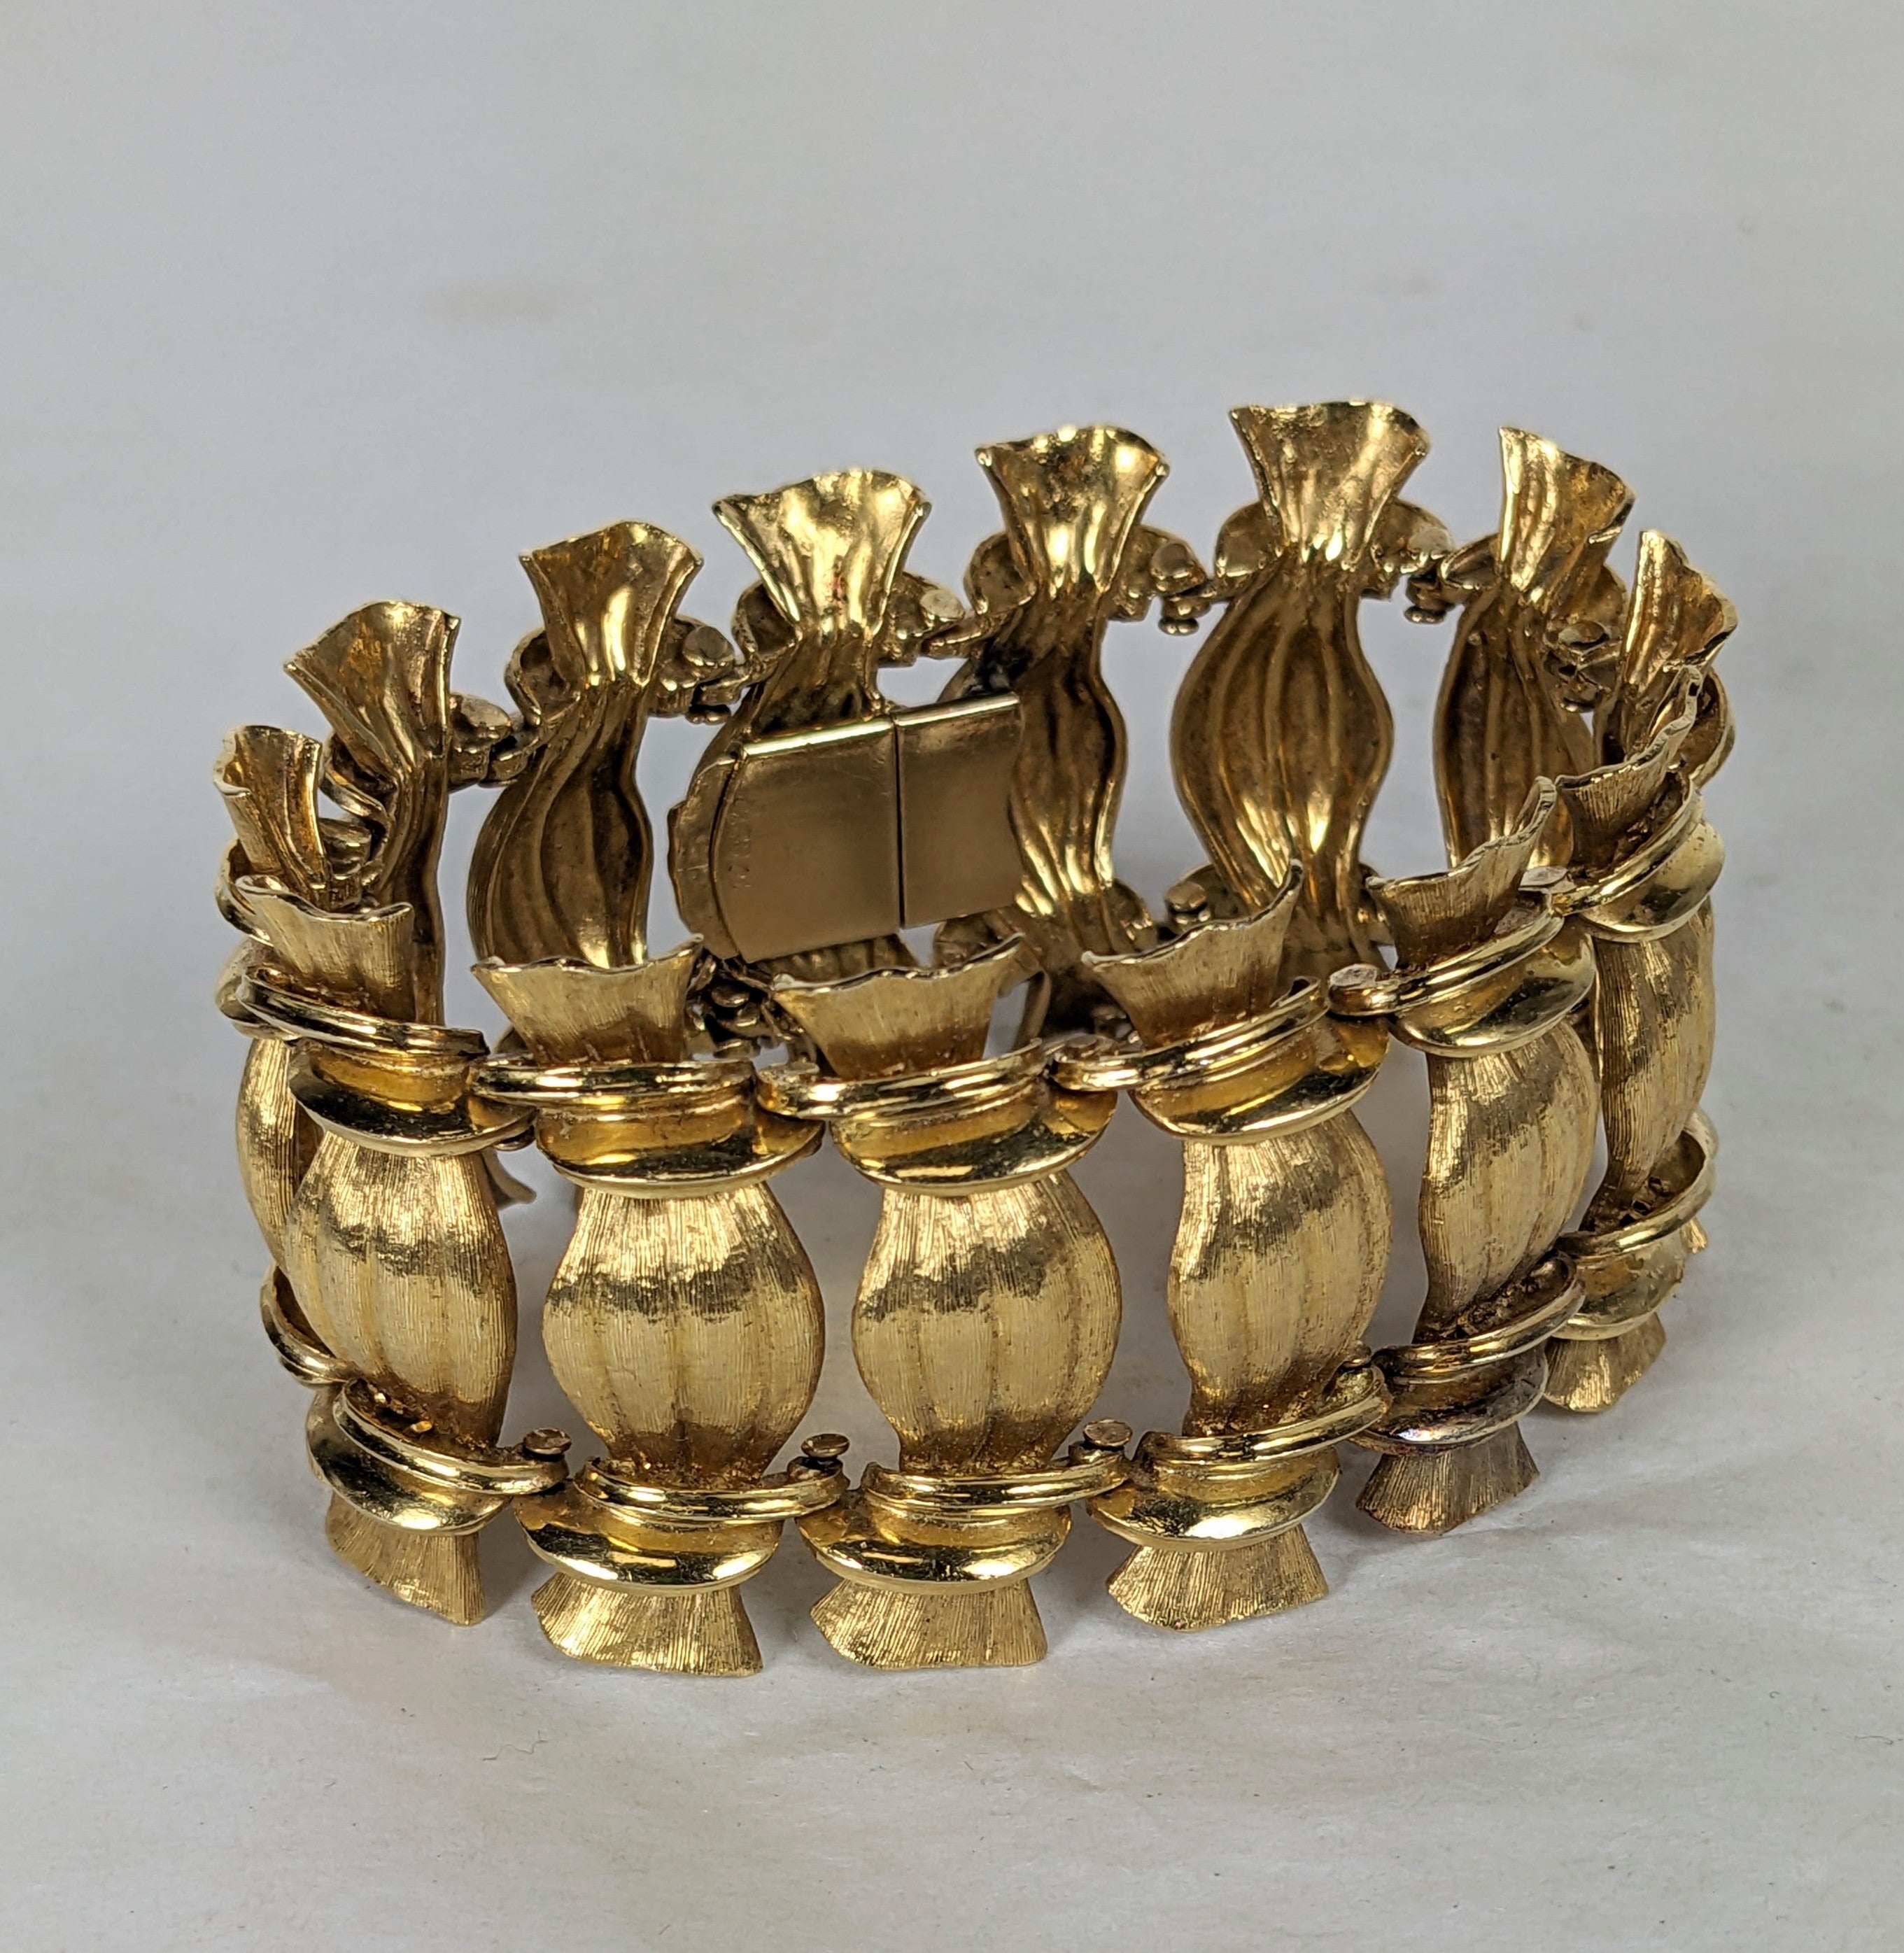 Elegant 18K Textured Bon Bon Link Bracelet from the 1960's of Italian origin. Each link looks like a textured wrapped candy and is linked by high polished gold connectors. Marked 18k, 750 std on tongue. Italy 1960's. Heavy, quality construction in